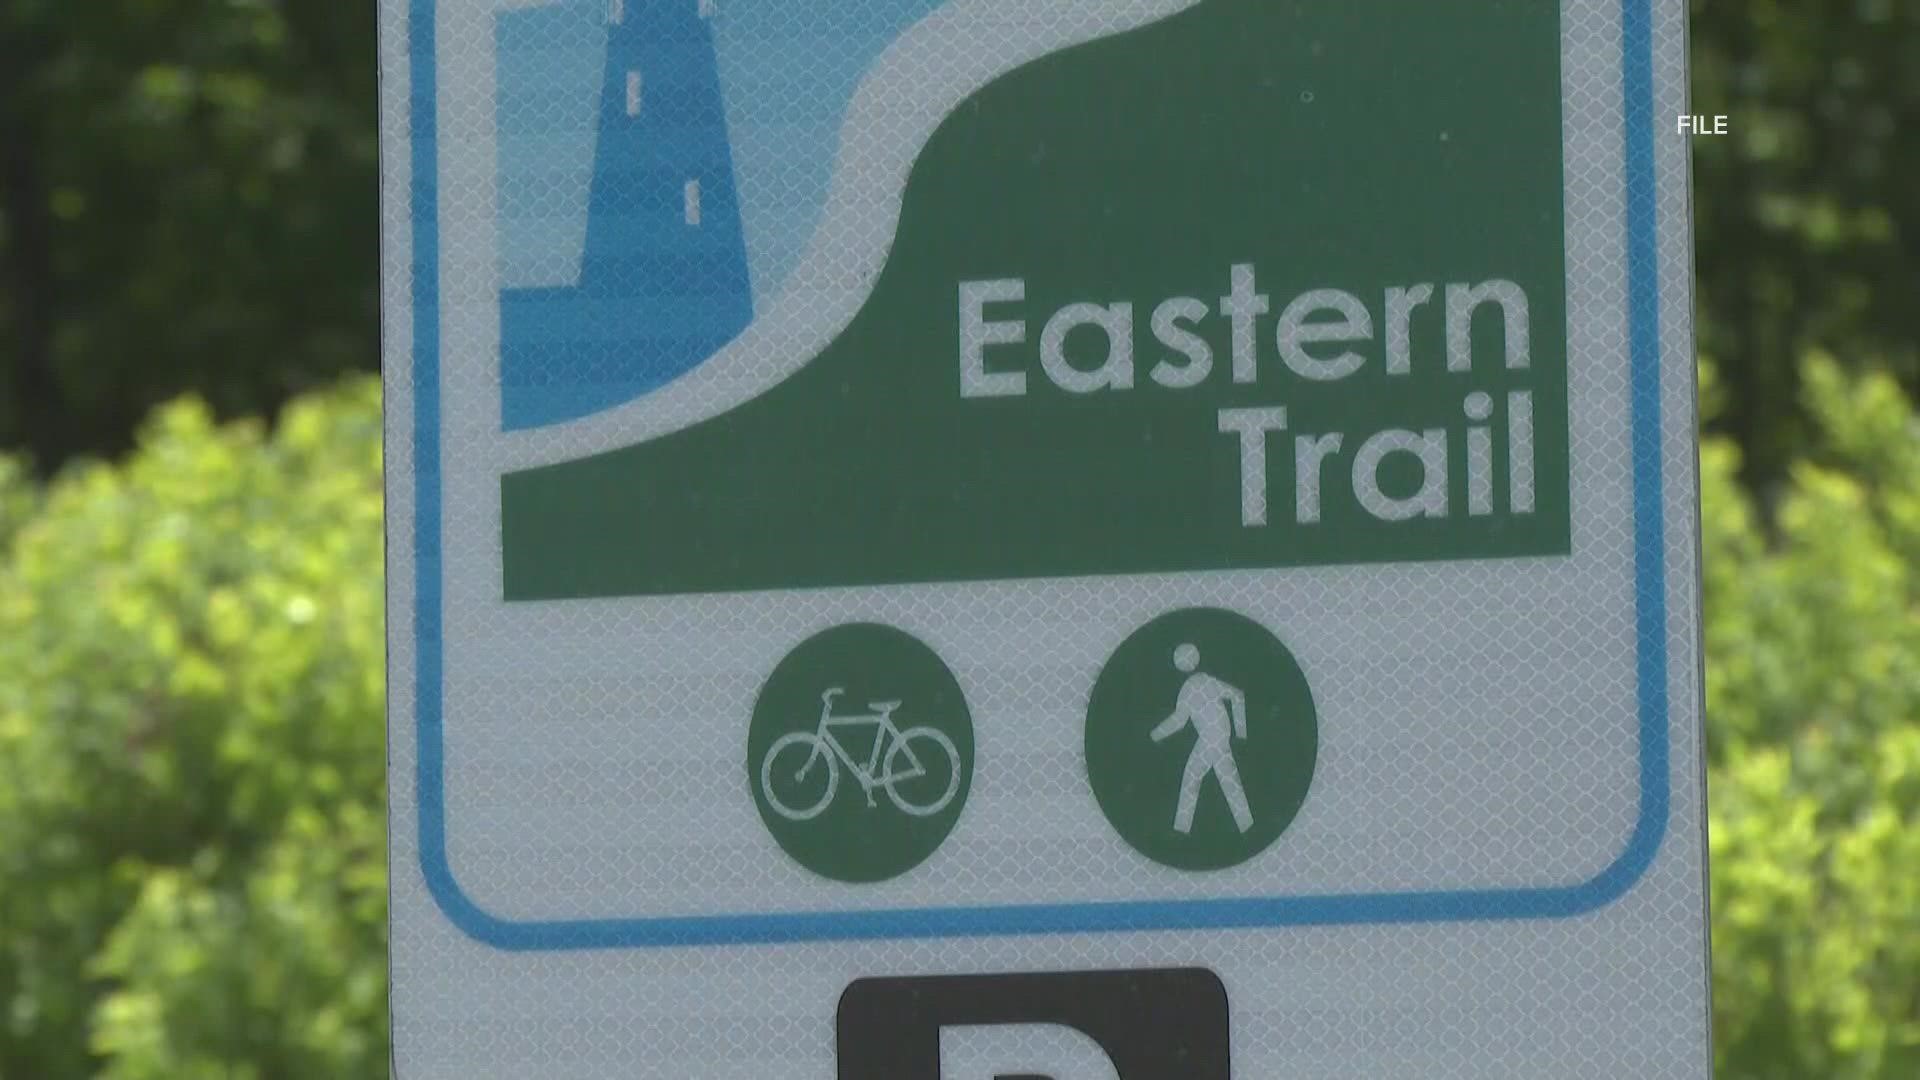 The Eastern Trail’s “Close the Gap” project aims to develop a trail from Scarborough to South Portland to create a continuous off-road trail from Saco to Bug Light.